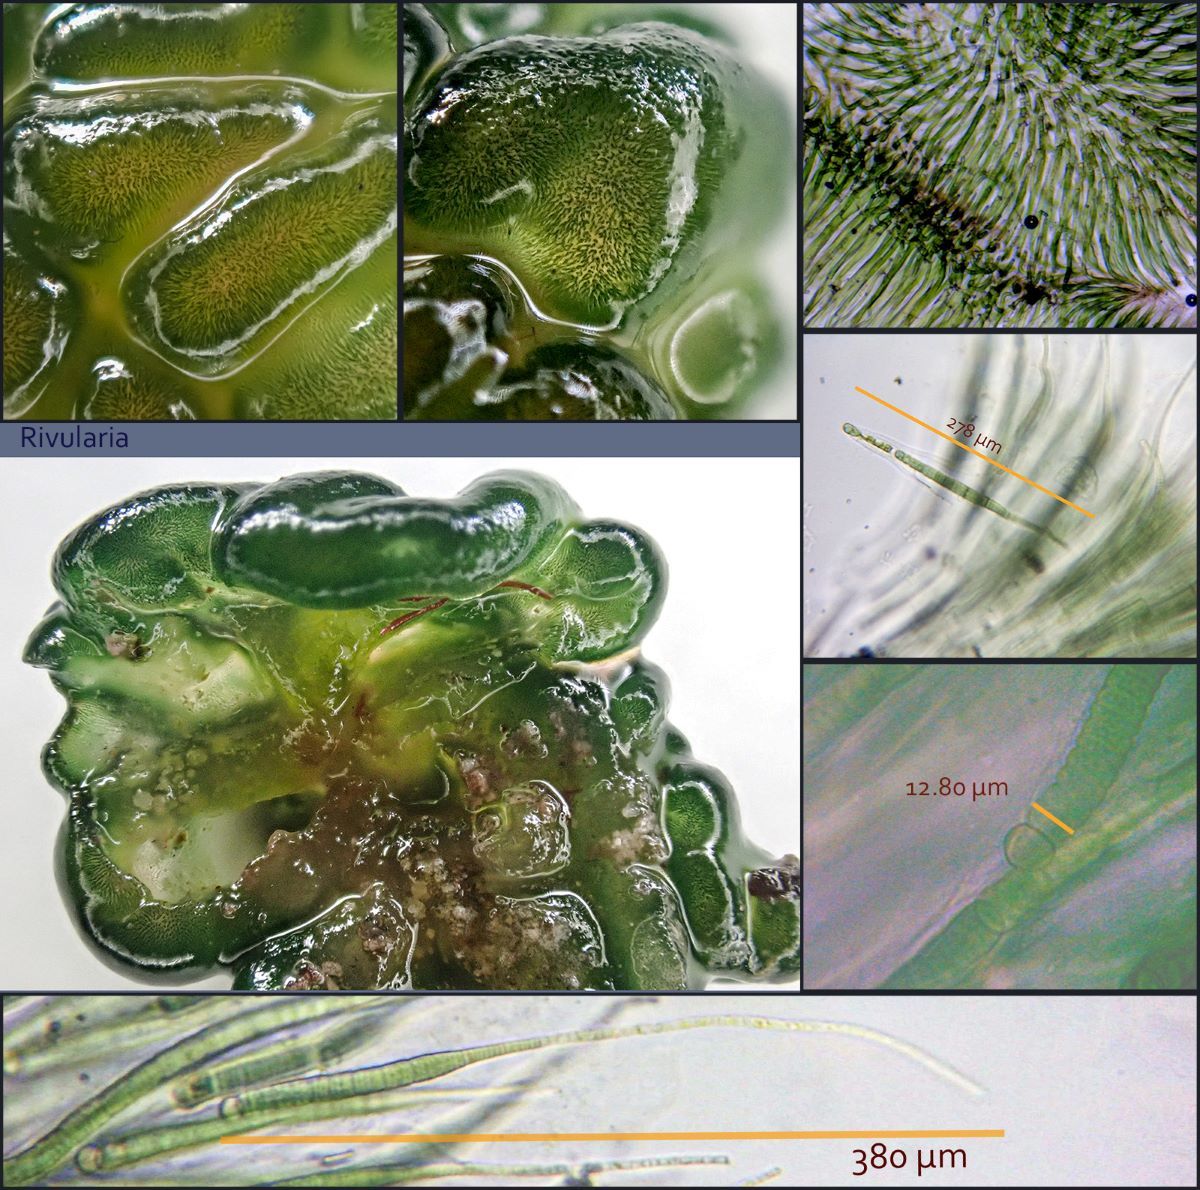 A collage of images showing multiple views of the cyanobacterium Rivularia. 